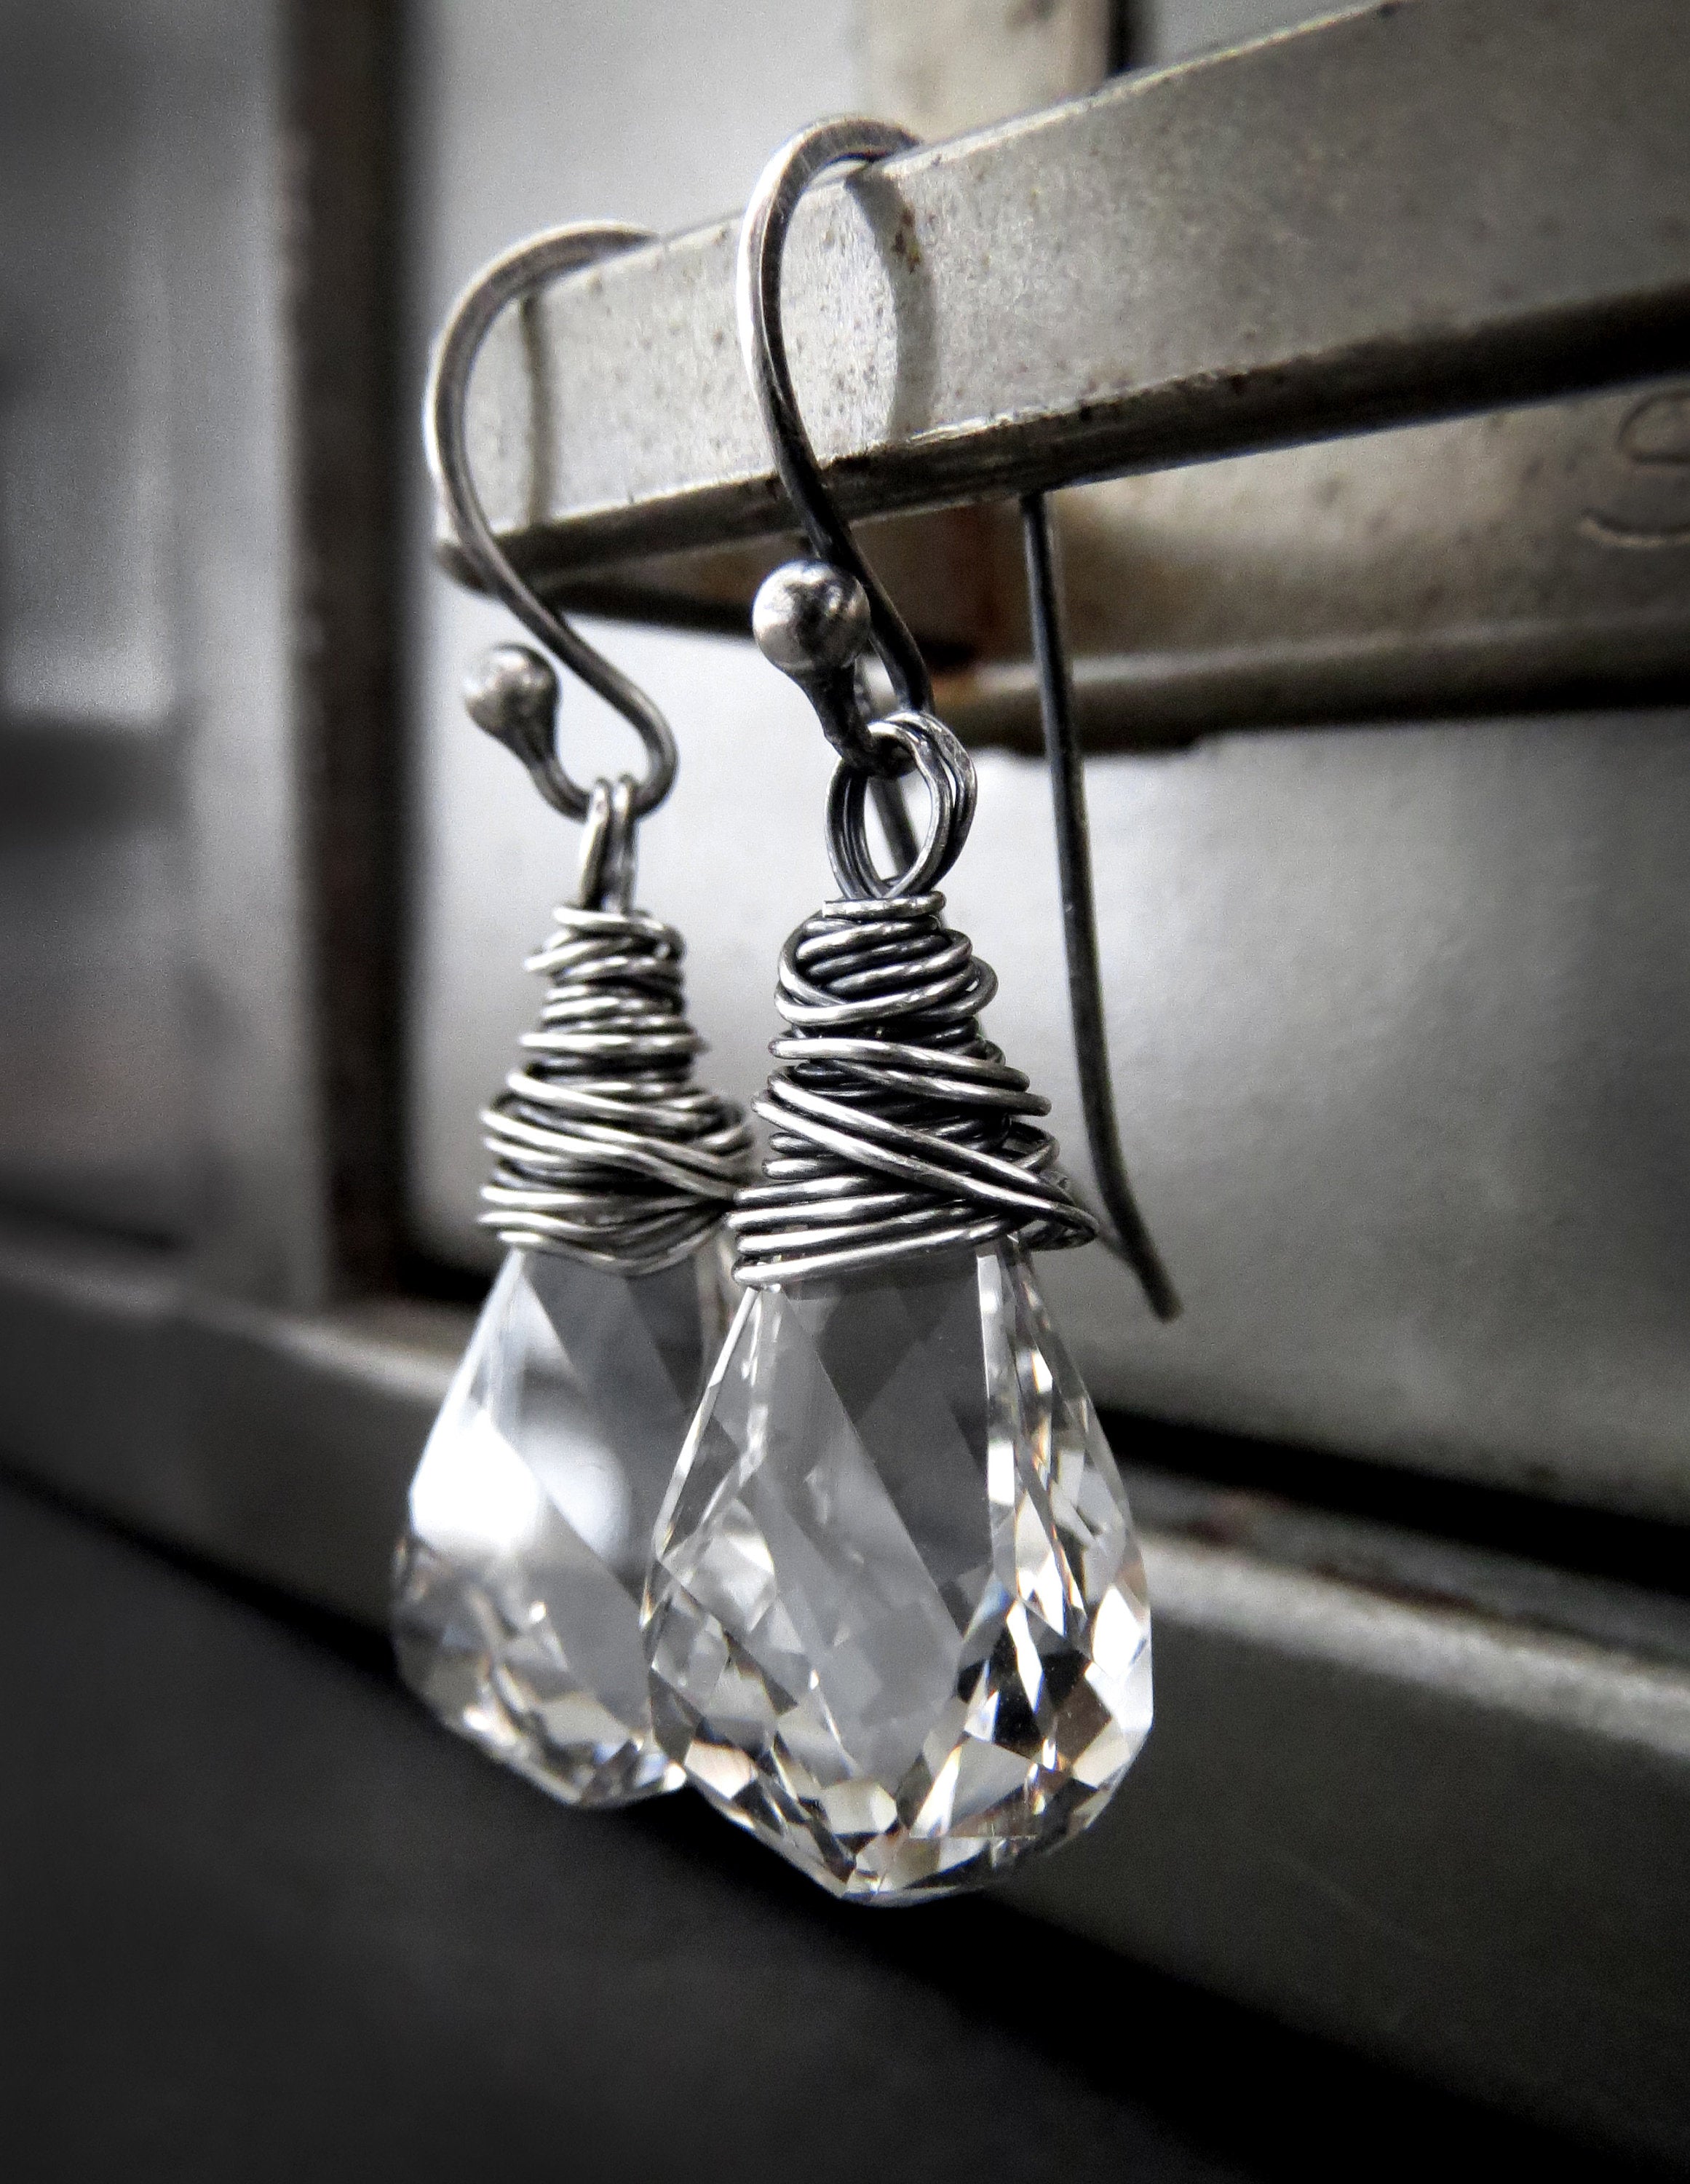 HELIX - Sterling Silver Wrapped Earrings with Spiral-Faceted Crystal